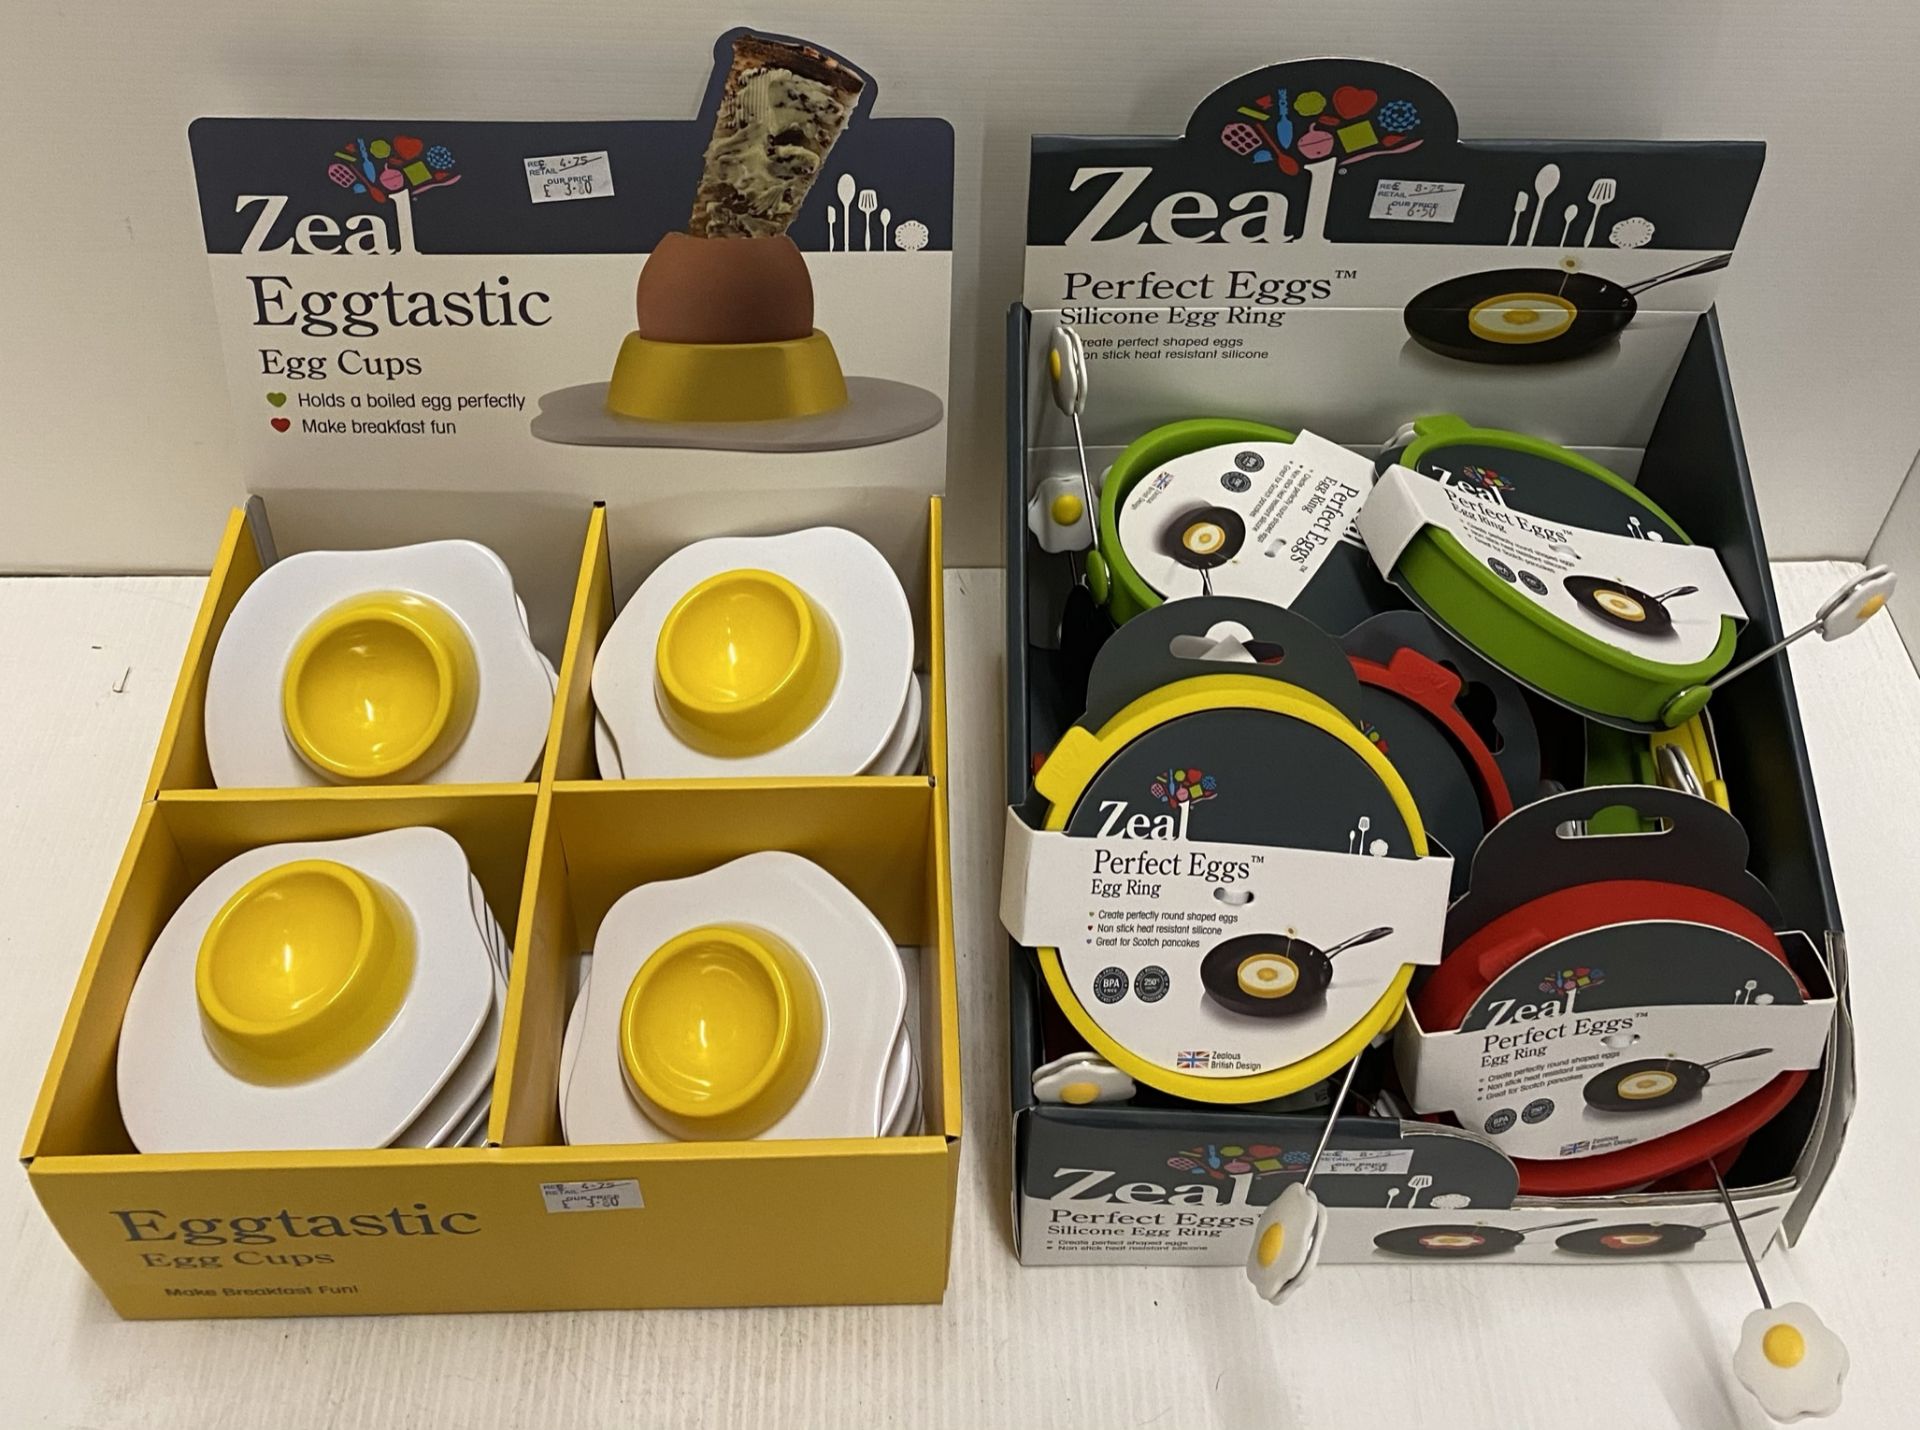 38 x assorted Zeal Eggtastic egg cups and Perfect Eggs silicone egg rings - RRP £4.75-£8.